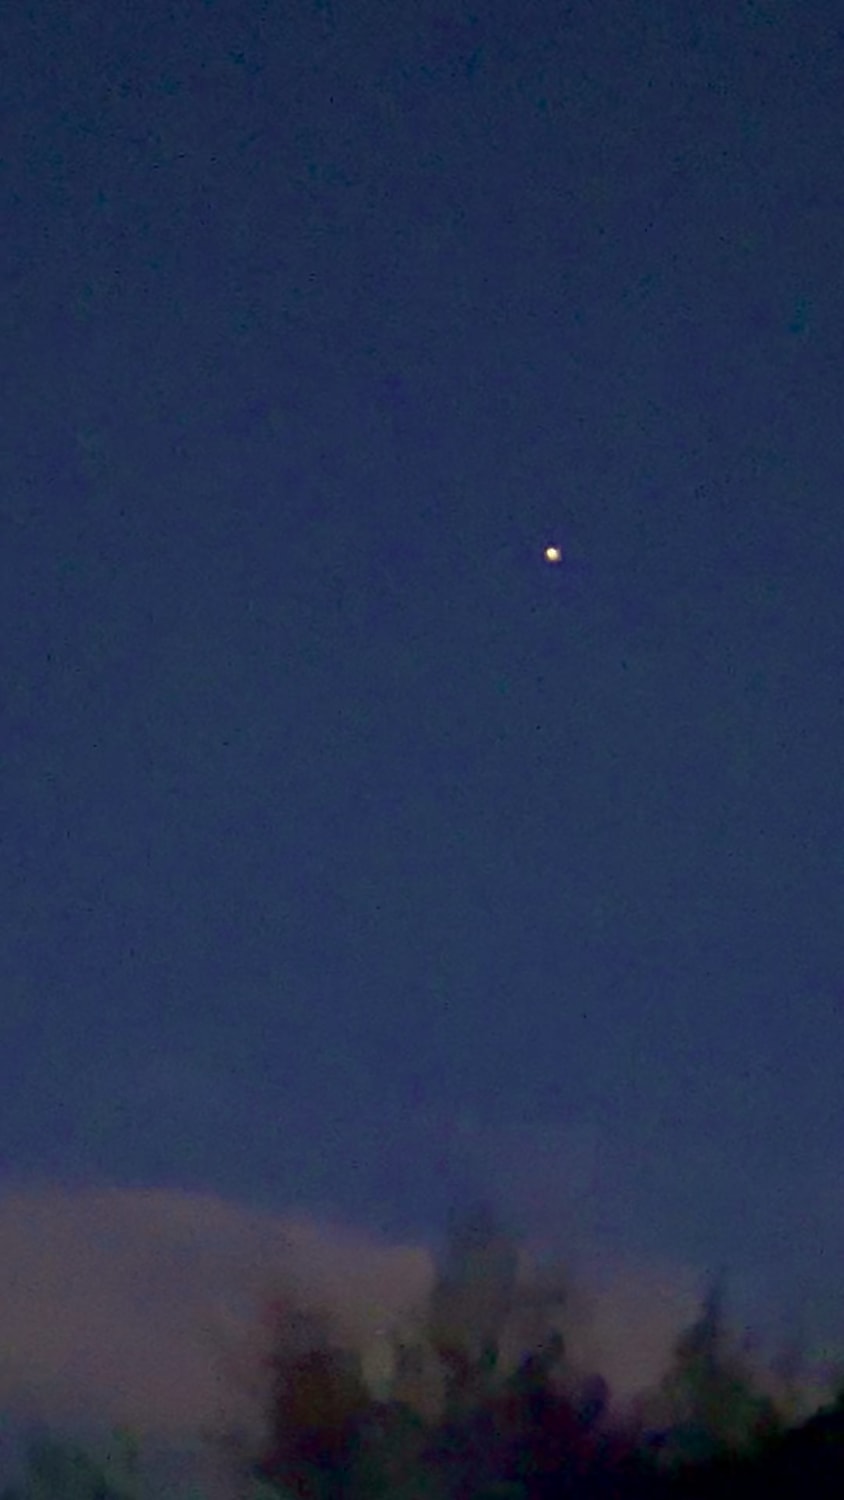 saw the same moving orb in Texas 2 nights ago